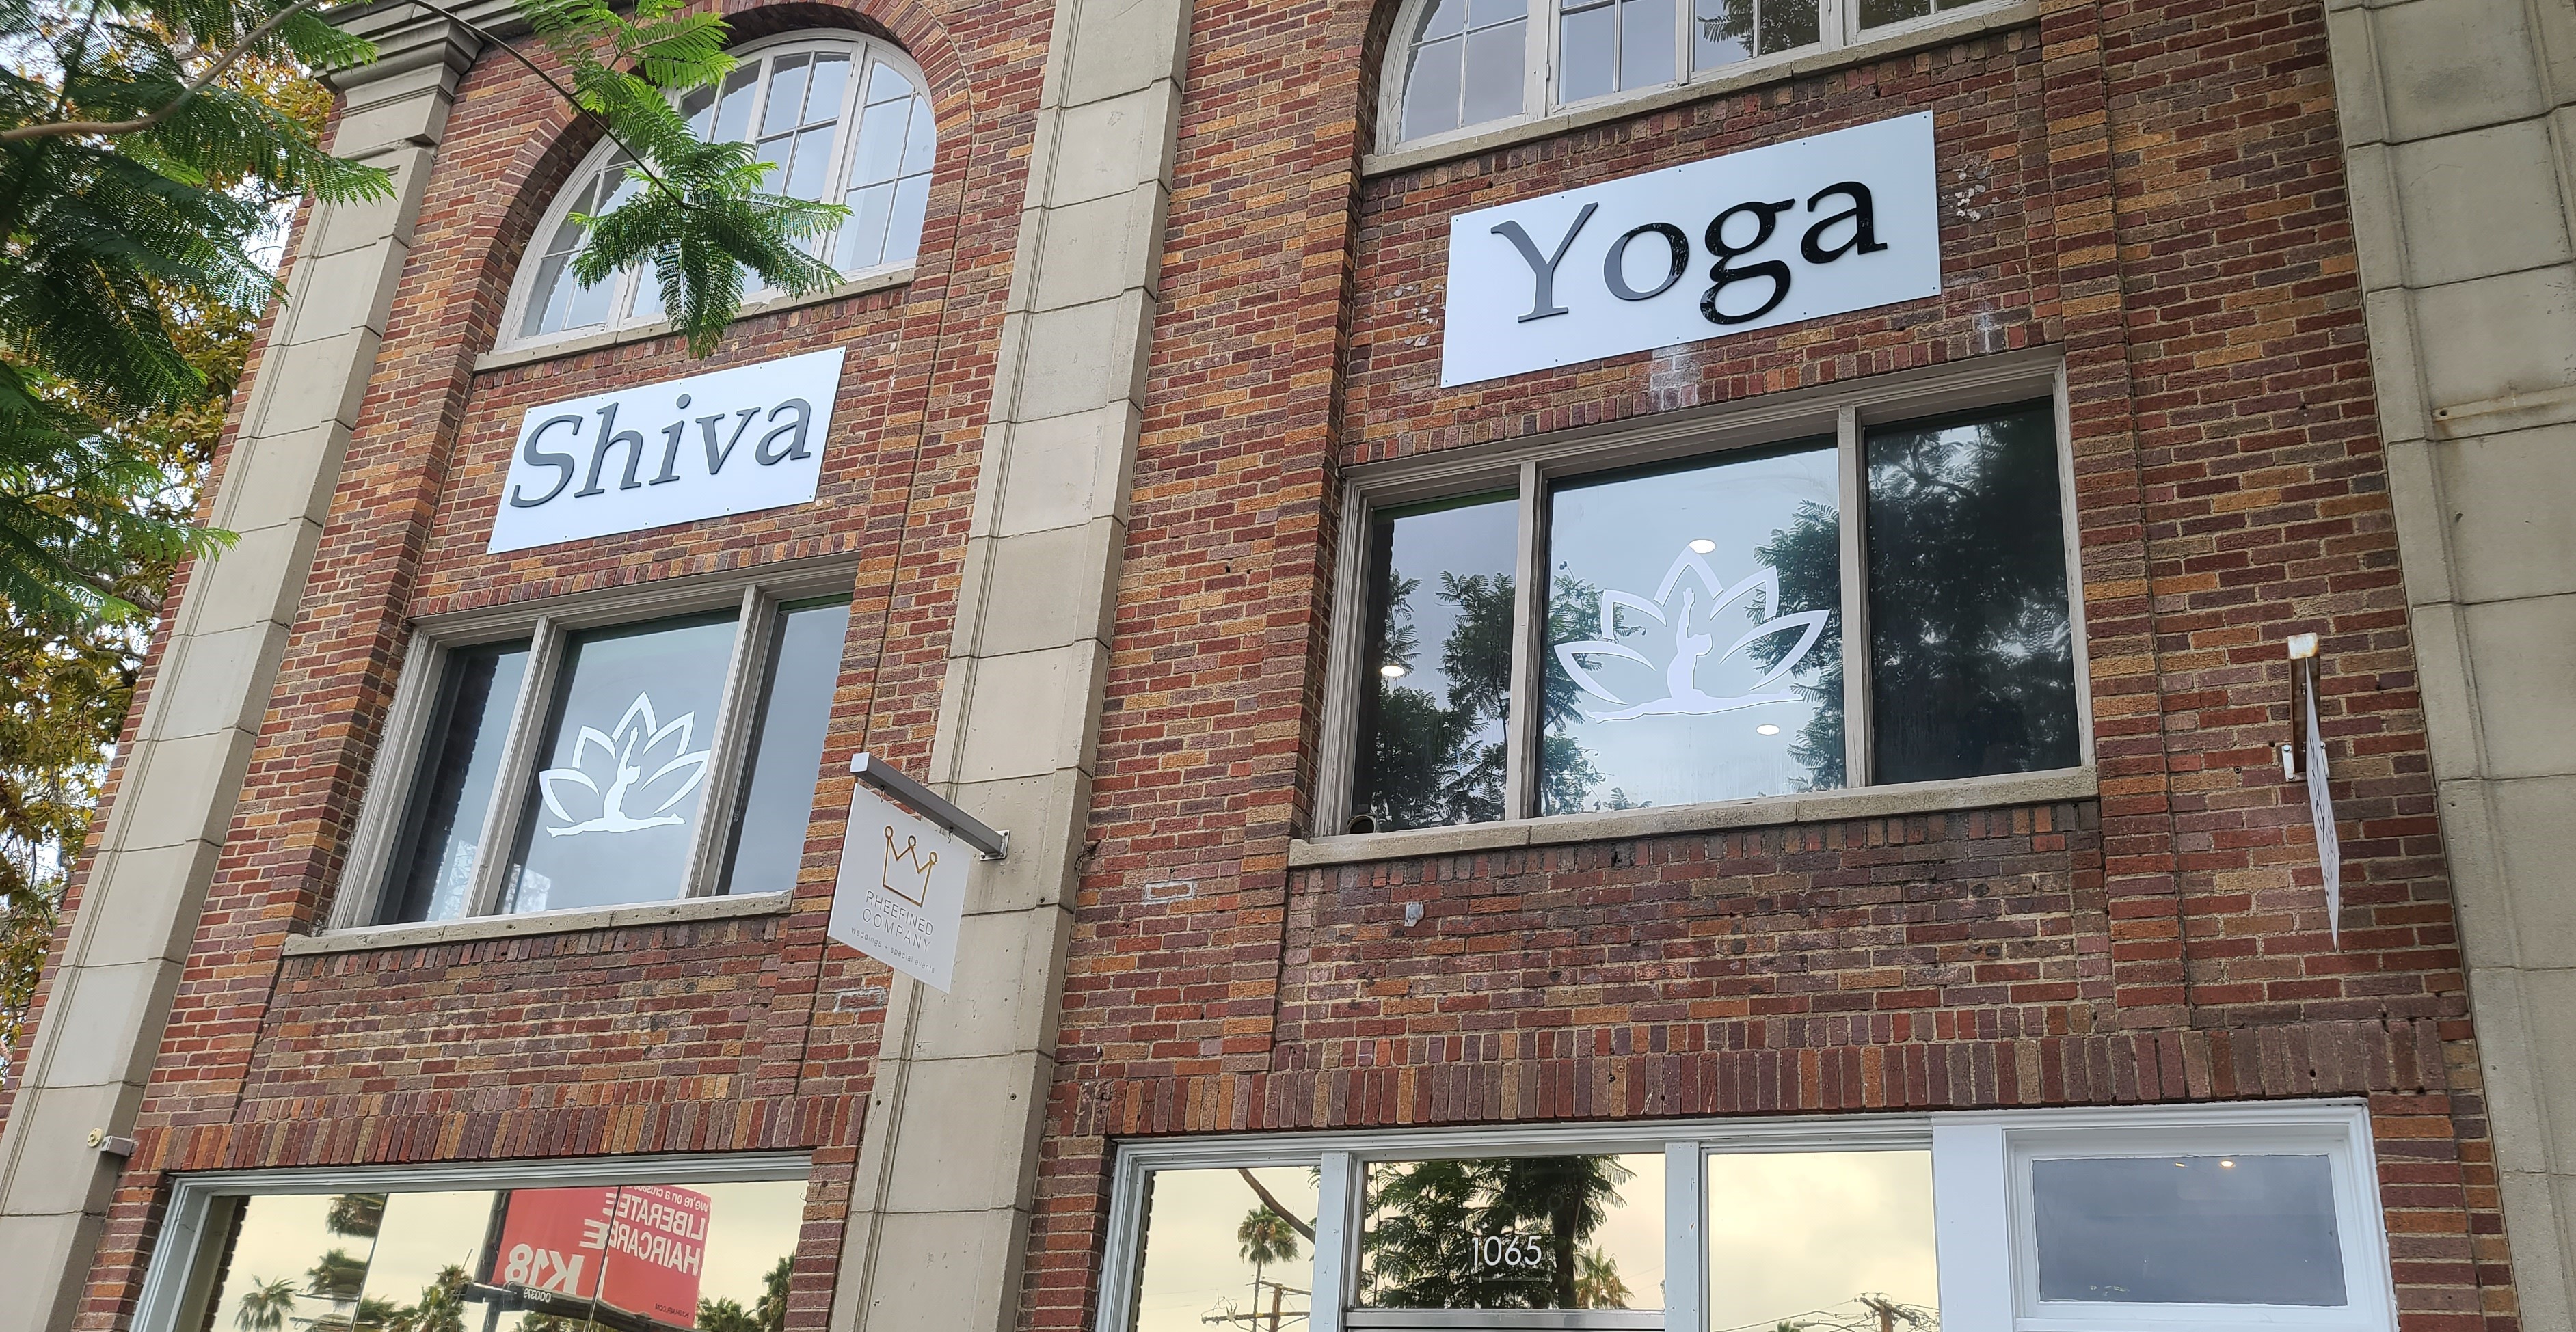 This is the studio sign for Shiva Yoga's West Hollywood establishment, composed of acrylic letters on a metal panel over their entrance.